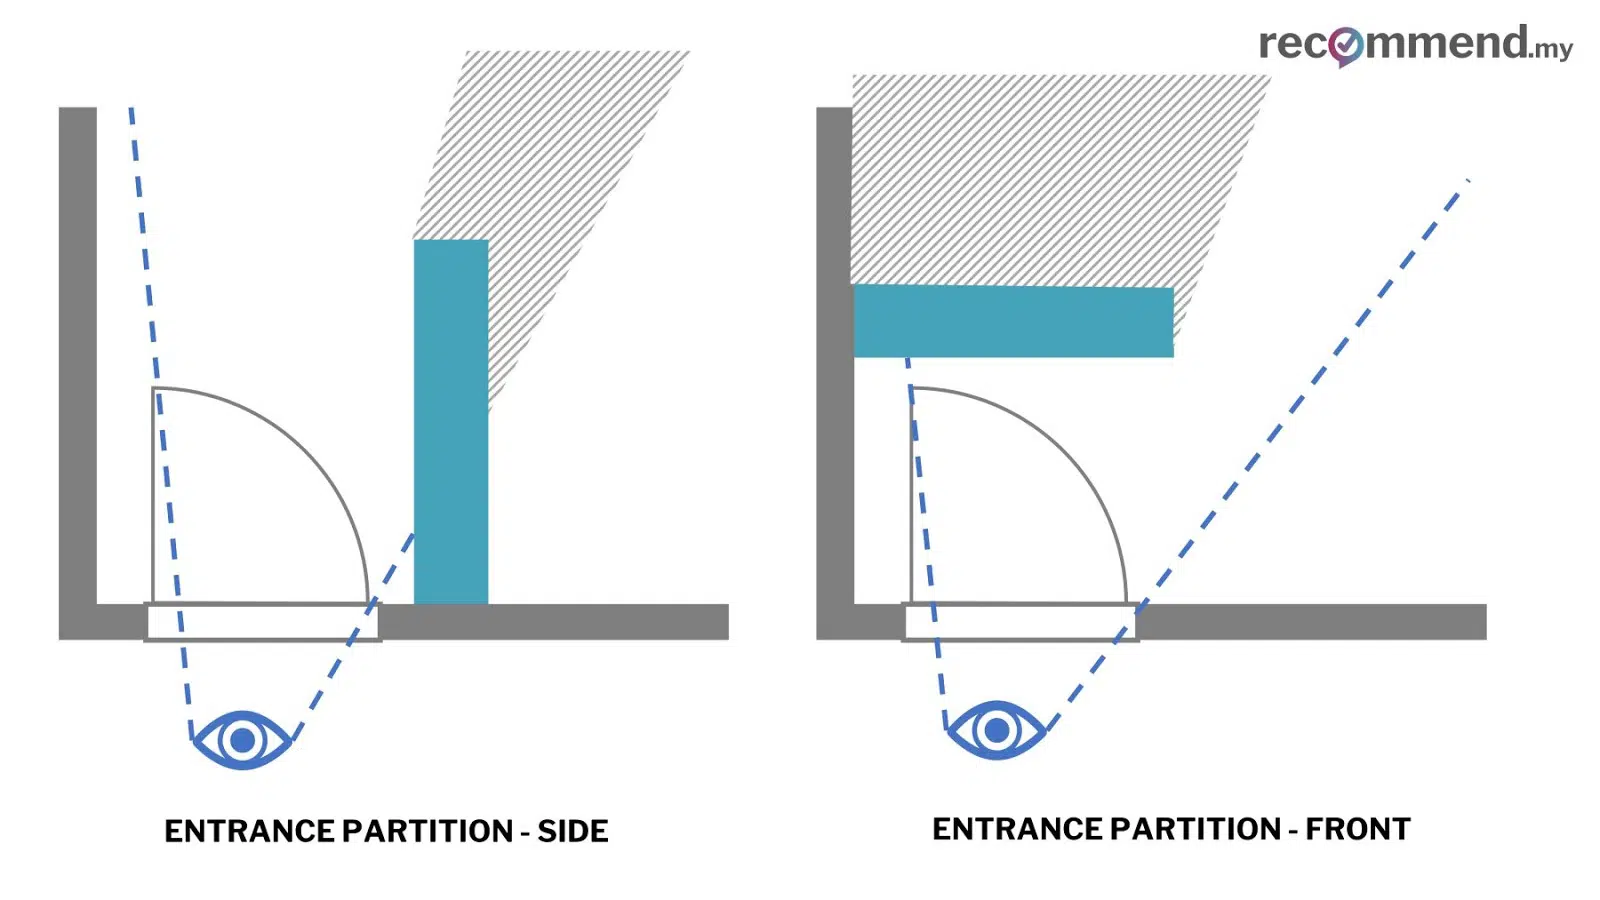 Above: Different placement of entrance partition and how it reduces the sight line for someone standing at the front door